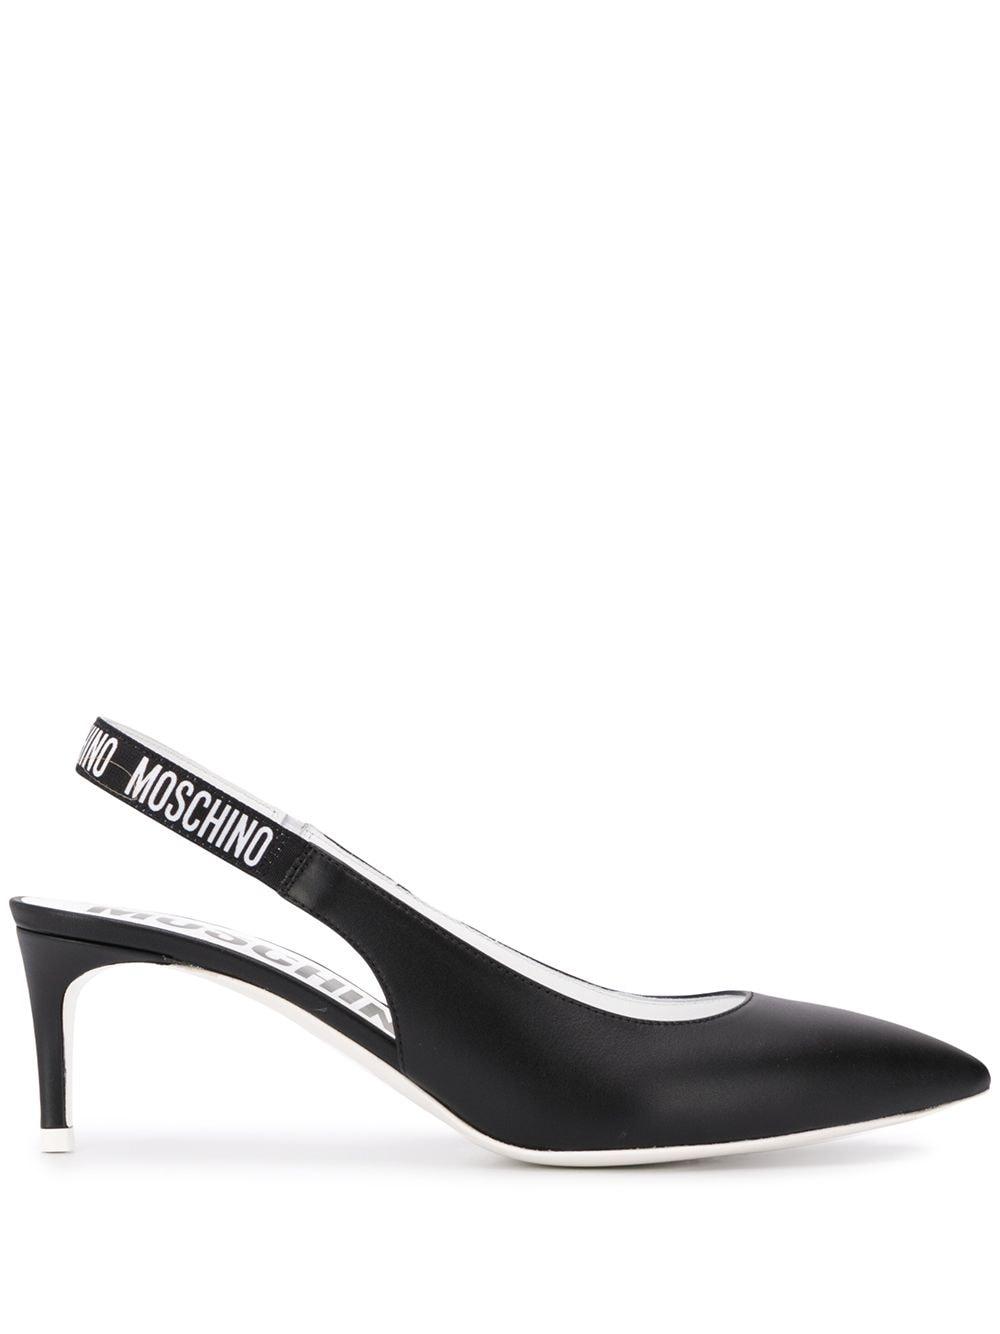 Moschino Leather Logo Slingback Pumps in 00 (Black) - Lyst